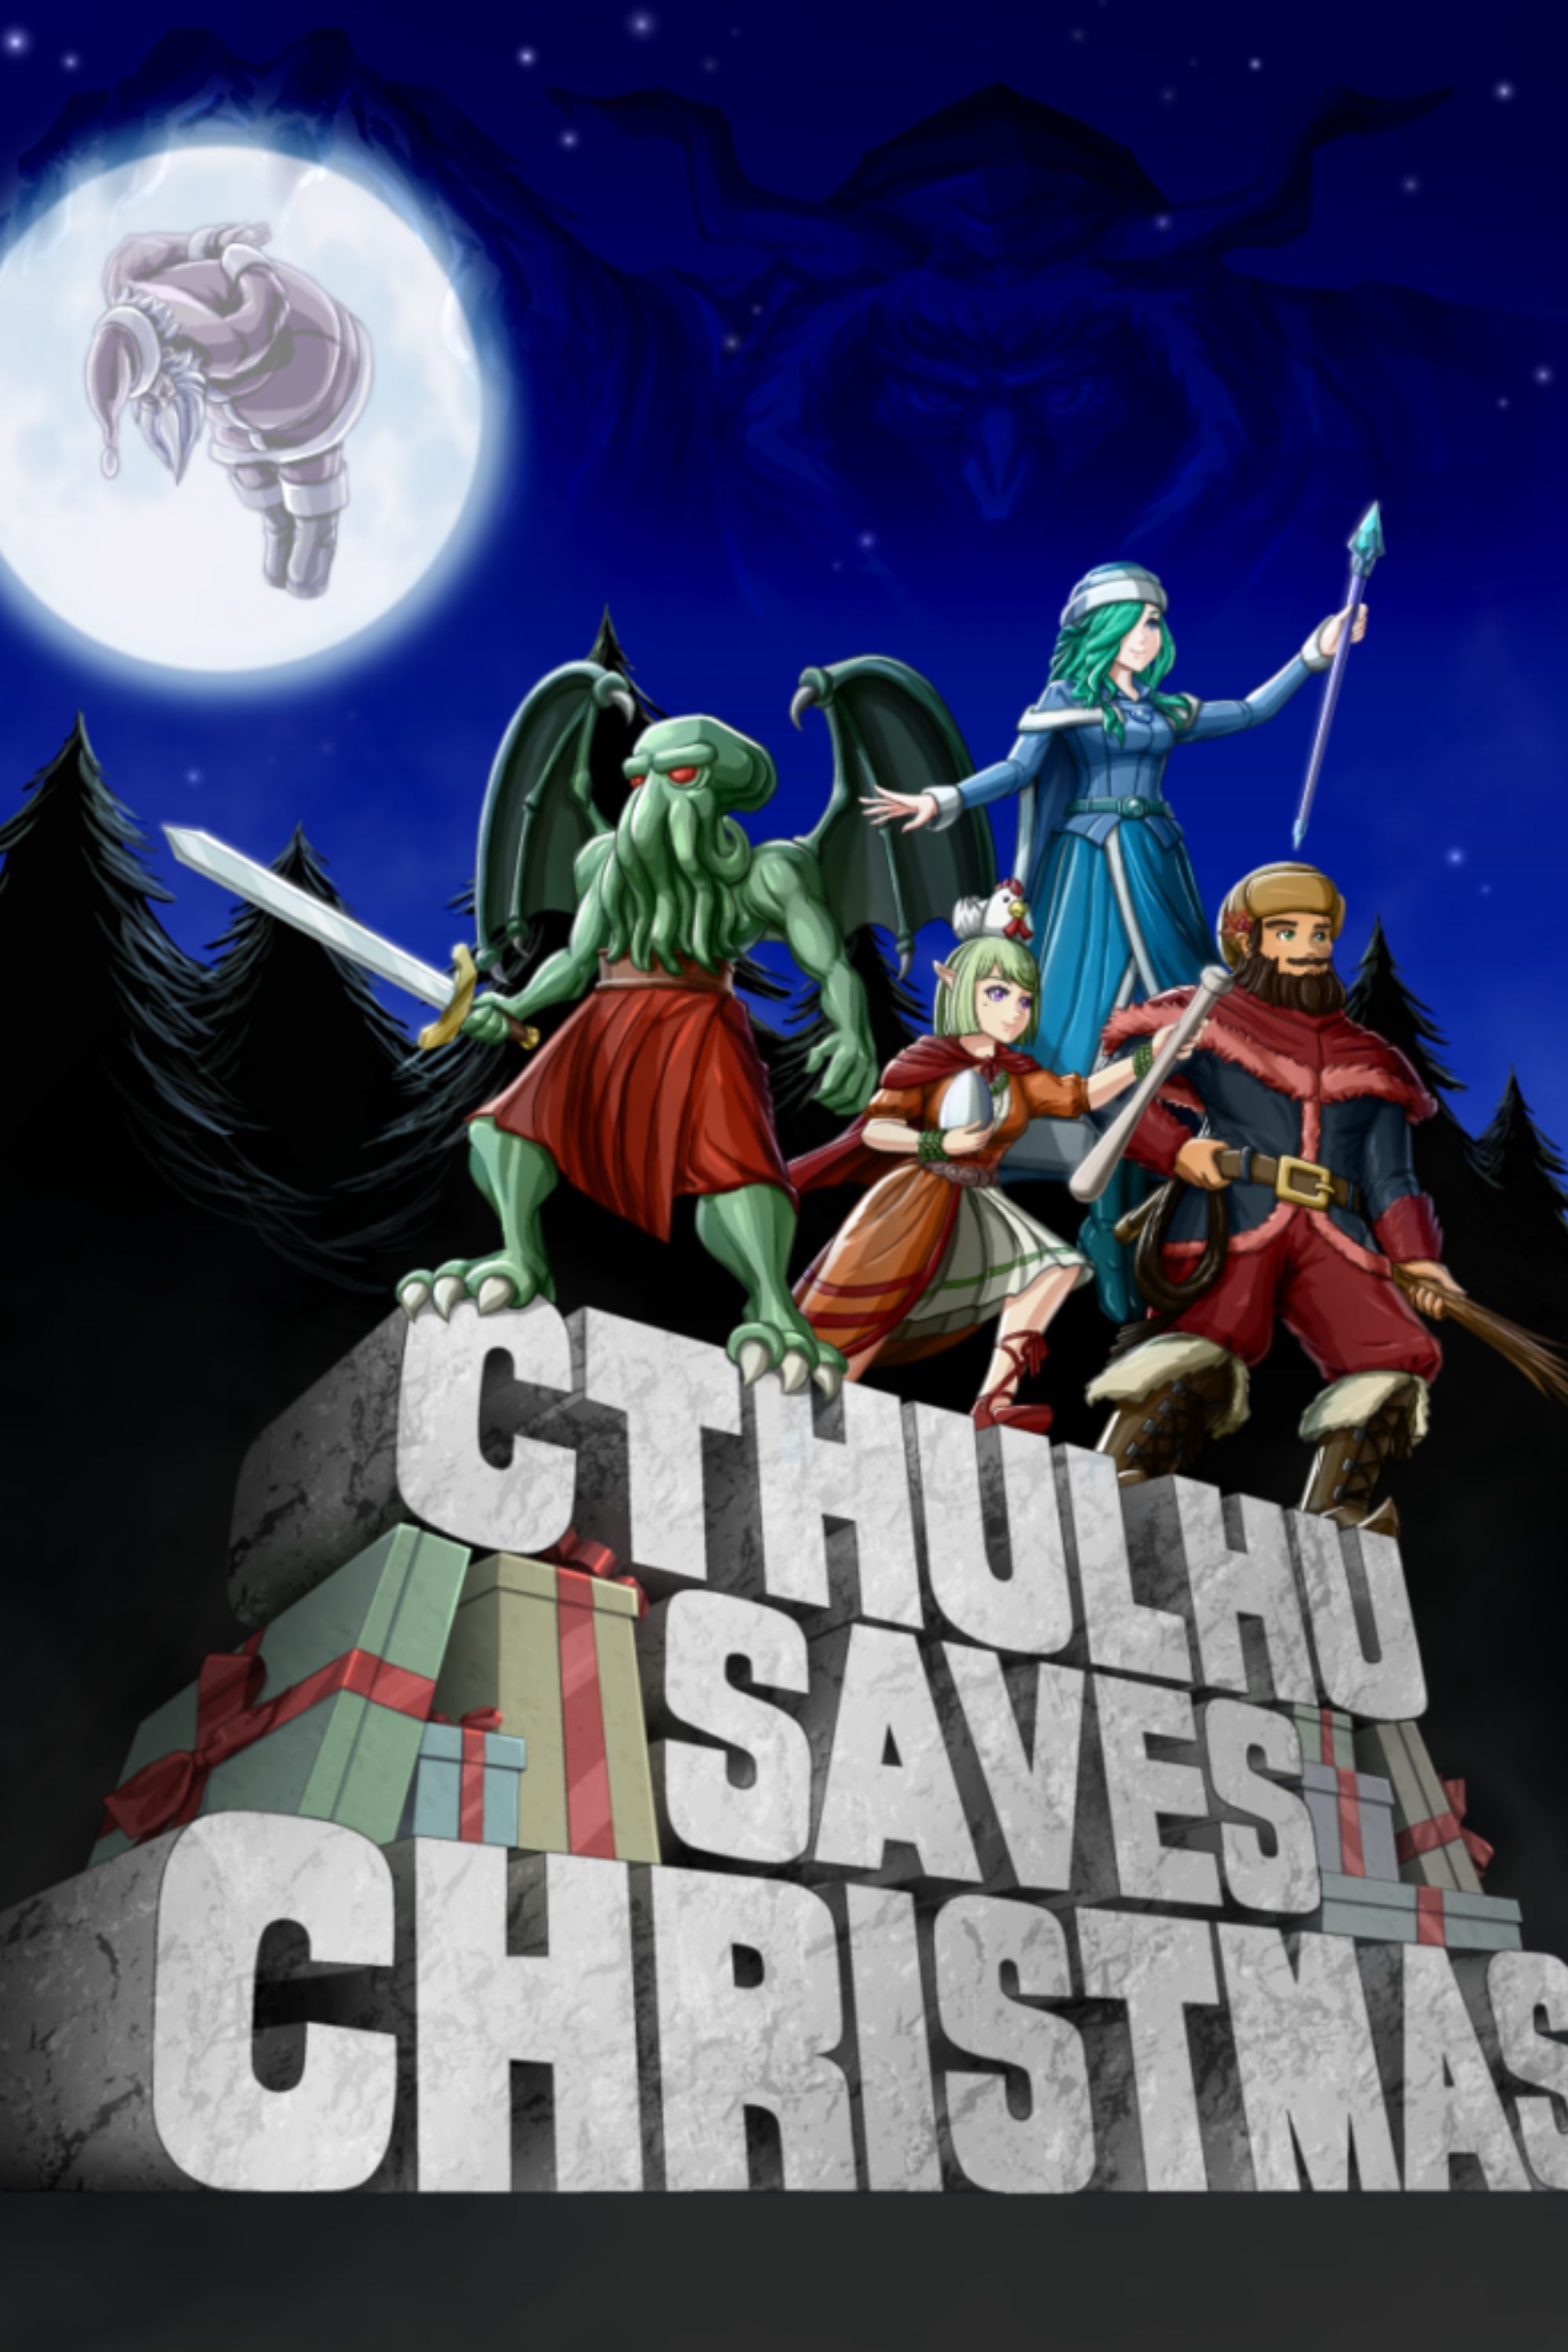 Cover image of Cthulhu Saves Christmas. The beast stands on the game's logo with a sword